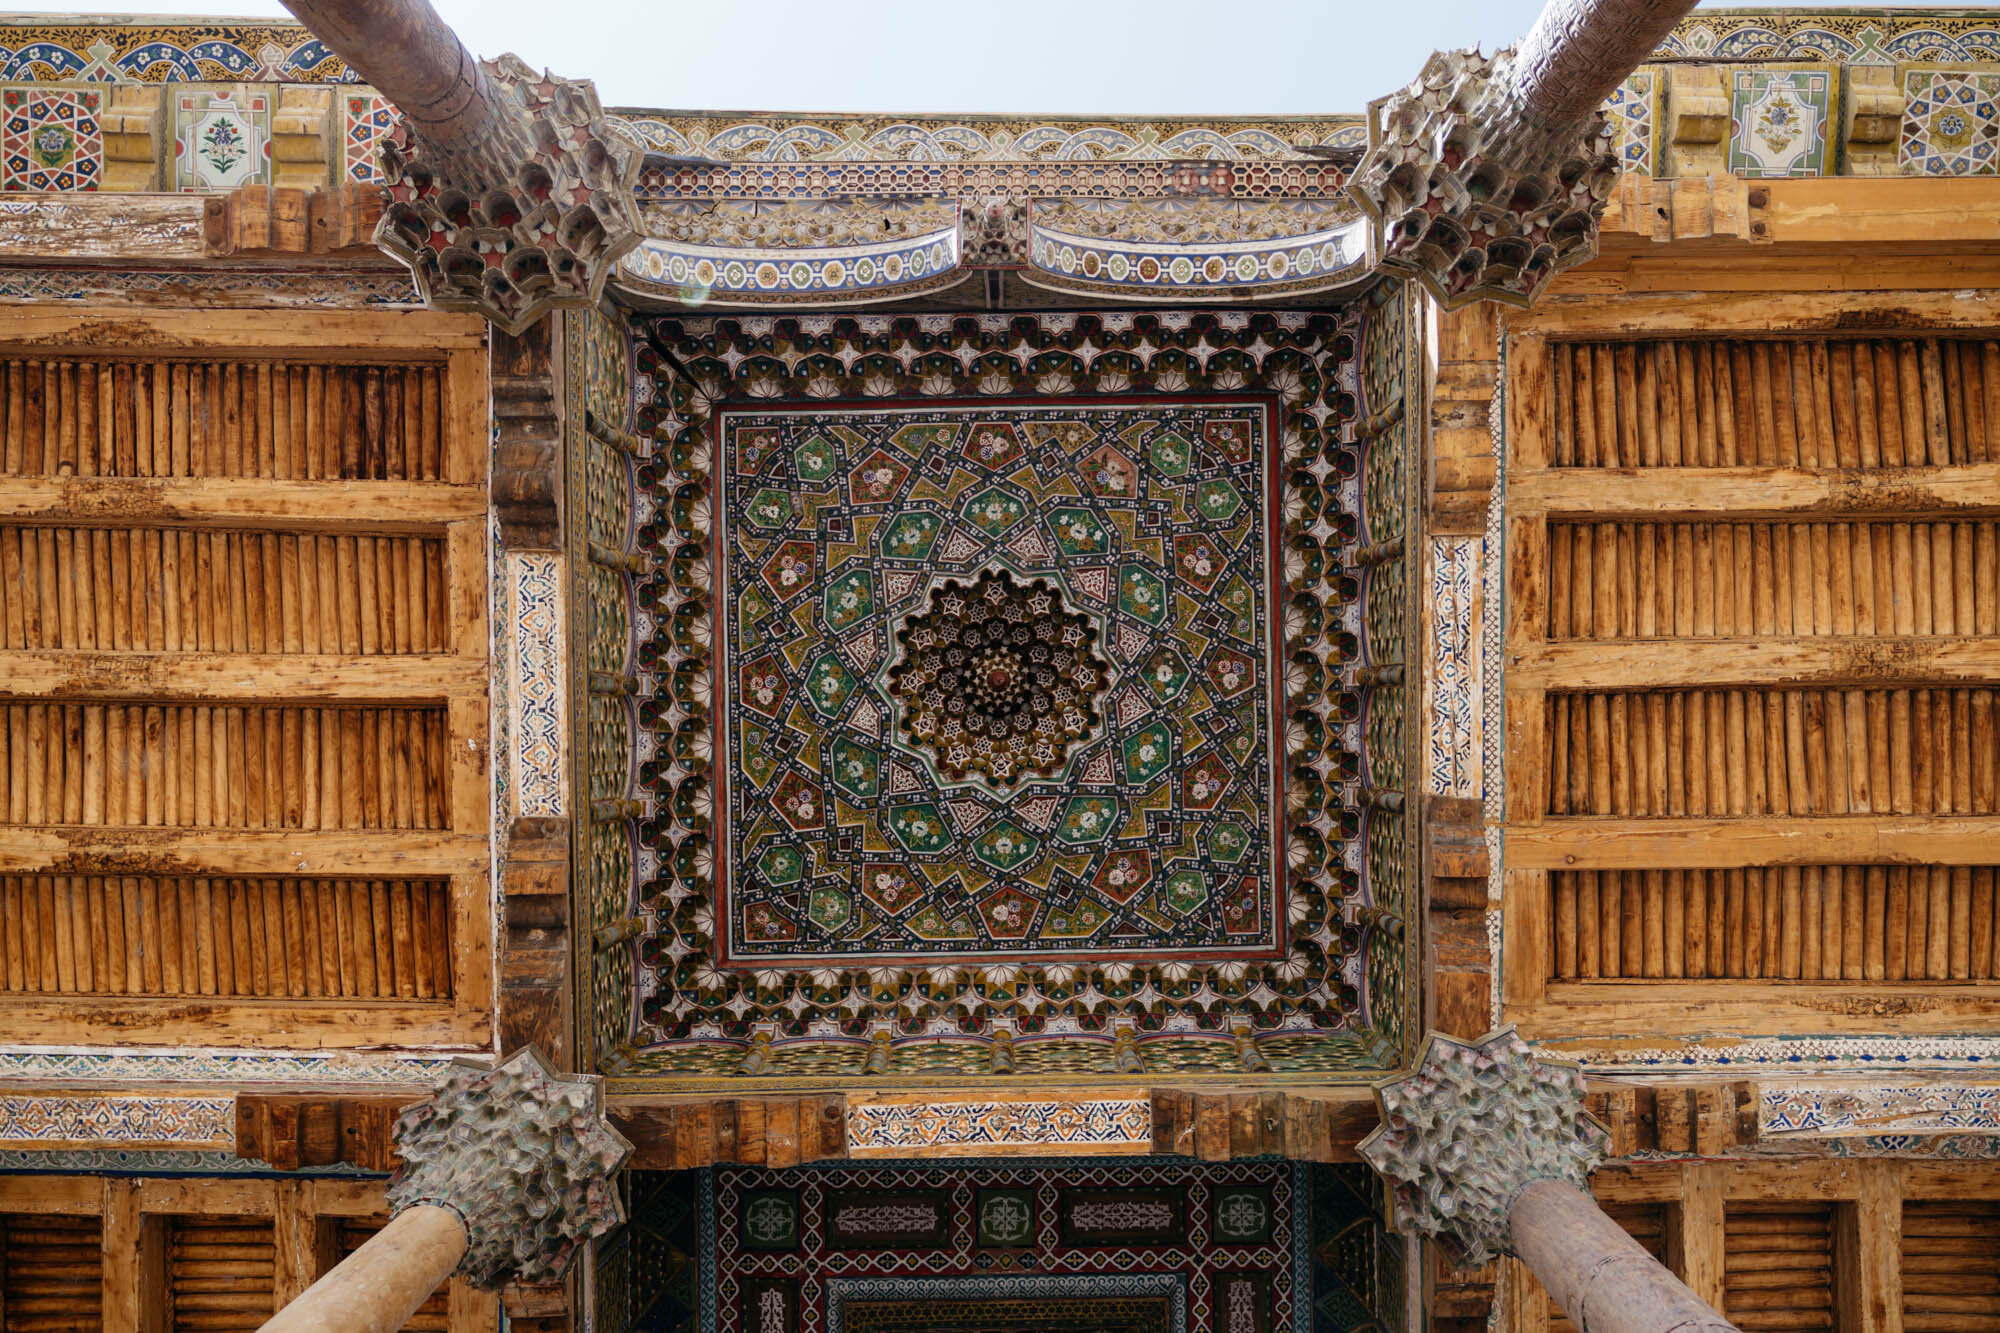  Ceiling details from the Bolo Haouz Mosque, Khiva 